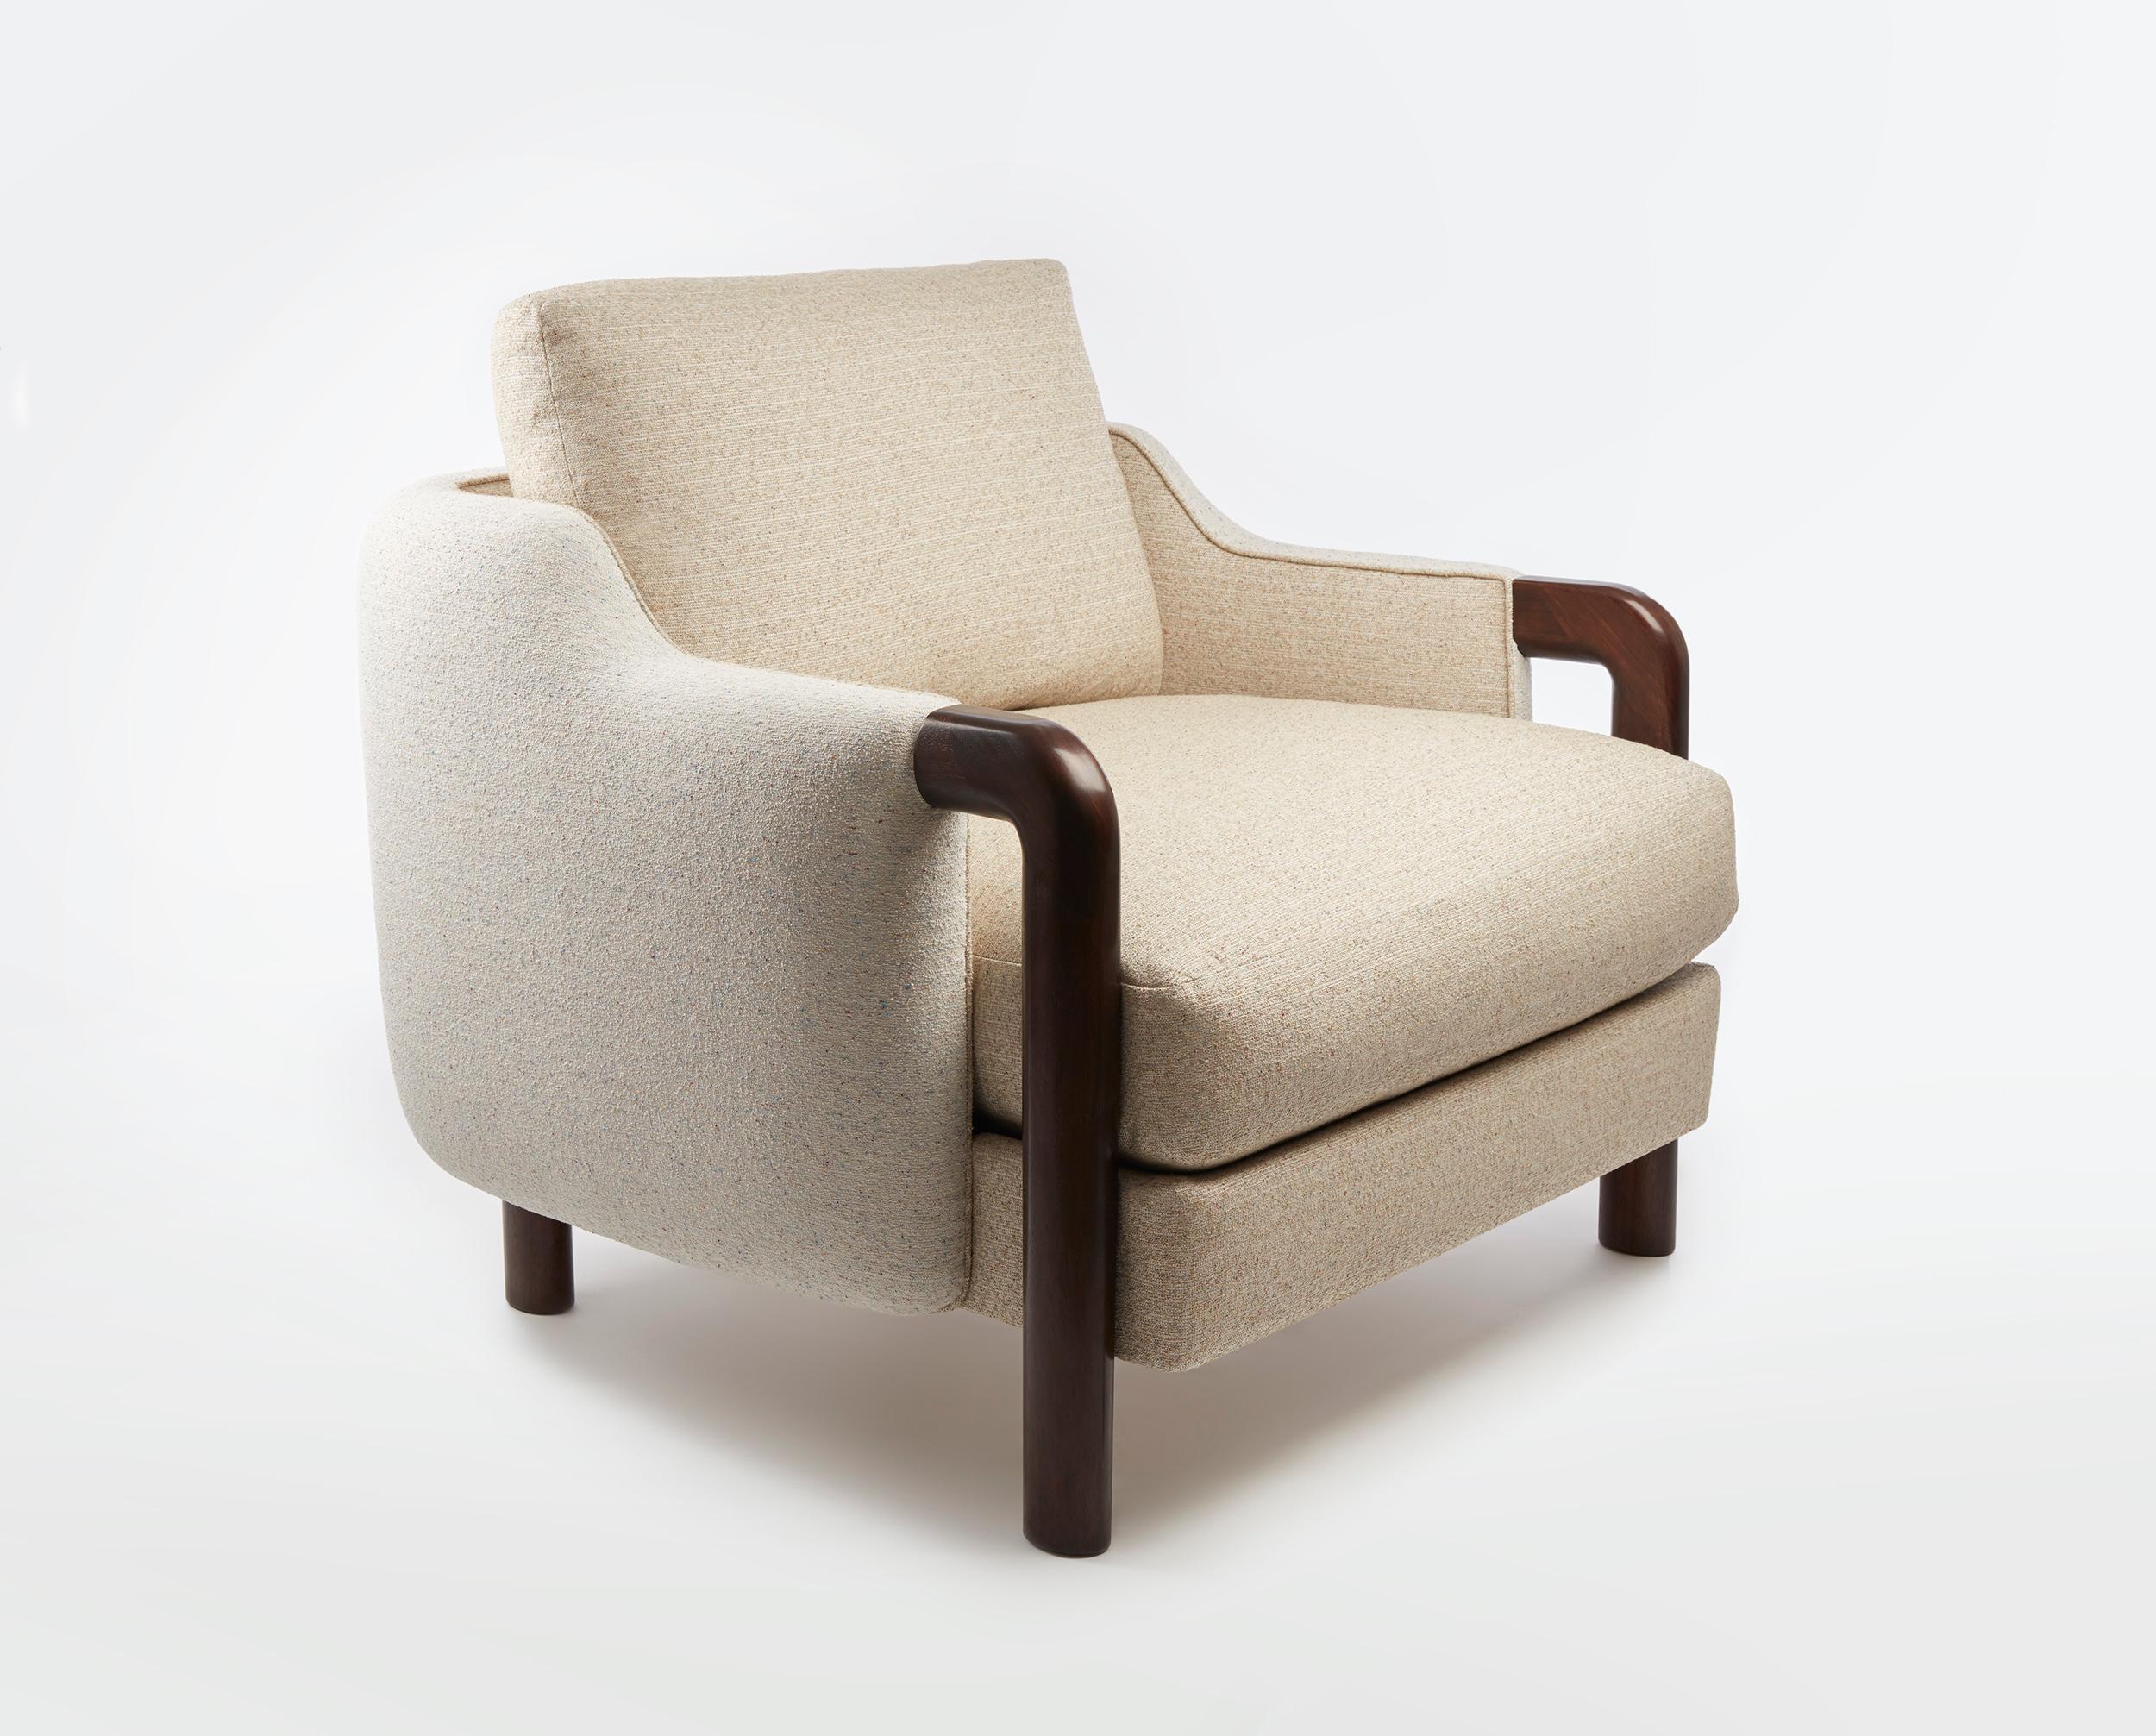 Junior Armchair by Gisbert Pöppler
Dimensions: H 82 (SH43) x W 84 x D 81,5 cm
Materials: American walnut, coil springs upholstered with padding and down

A place in the clouds! The Junior Chair is all about comfort. The low seating height, down